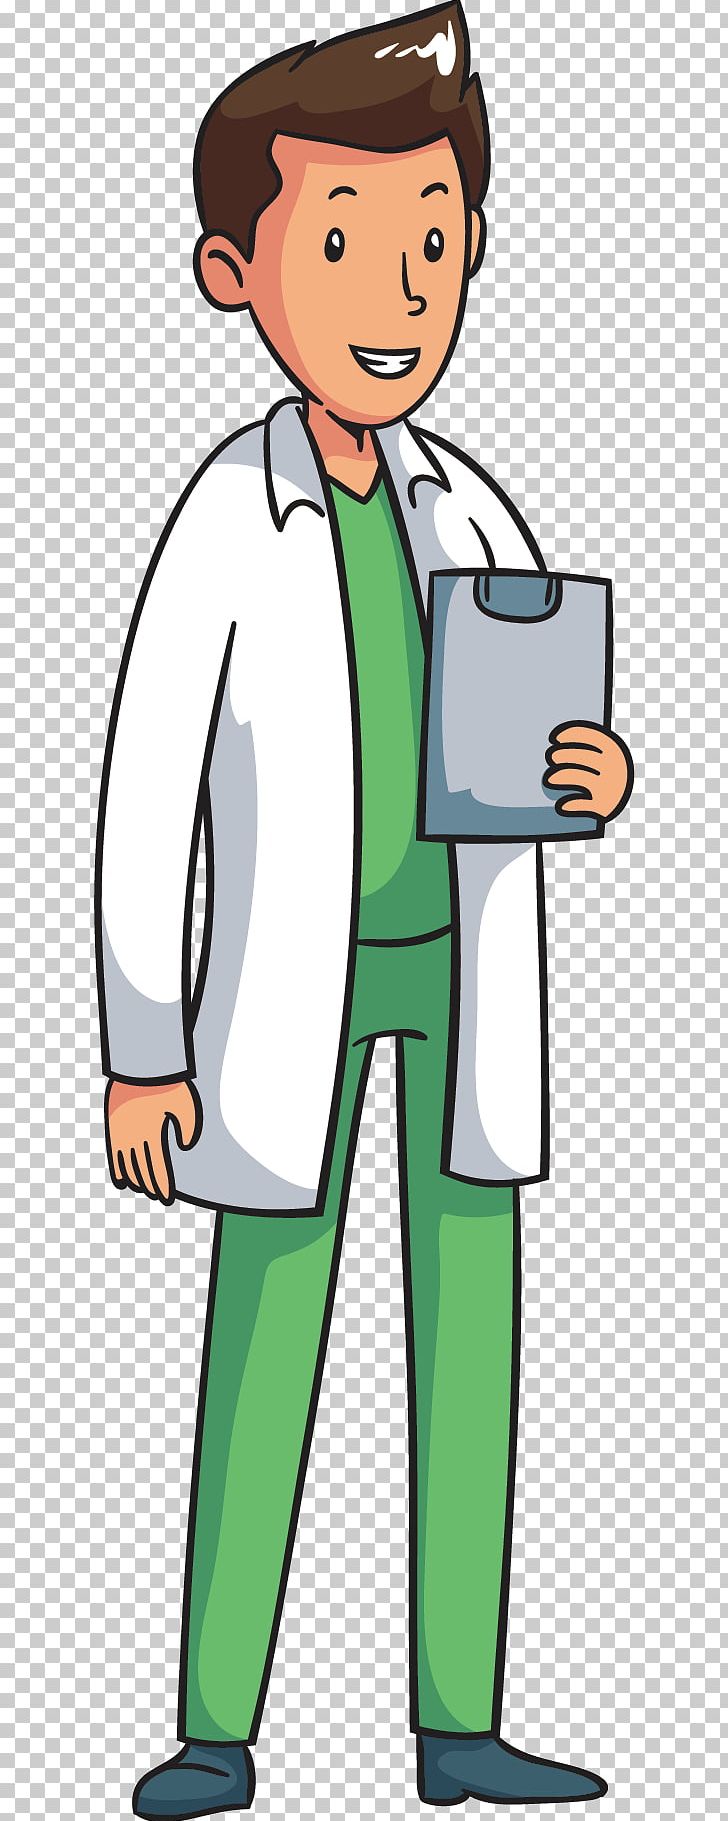 Drawing Cartoon Animation PNG, Clipart, Anime Doctor, Boy, Cartoon, Cartoon Character, Cartoon Cloud Free PNG Download